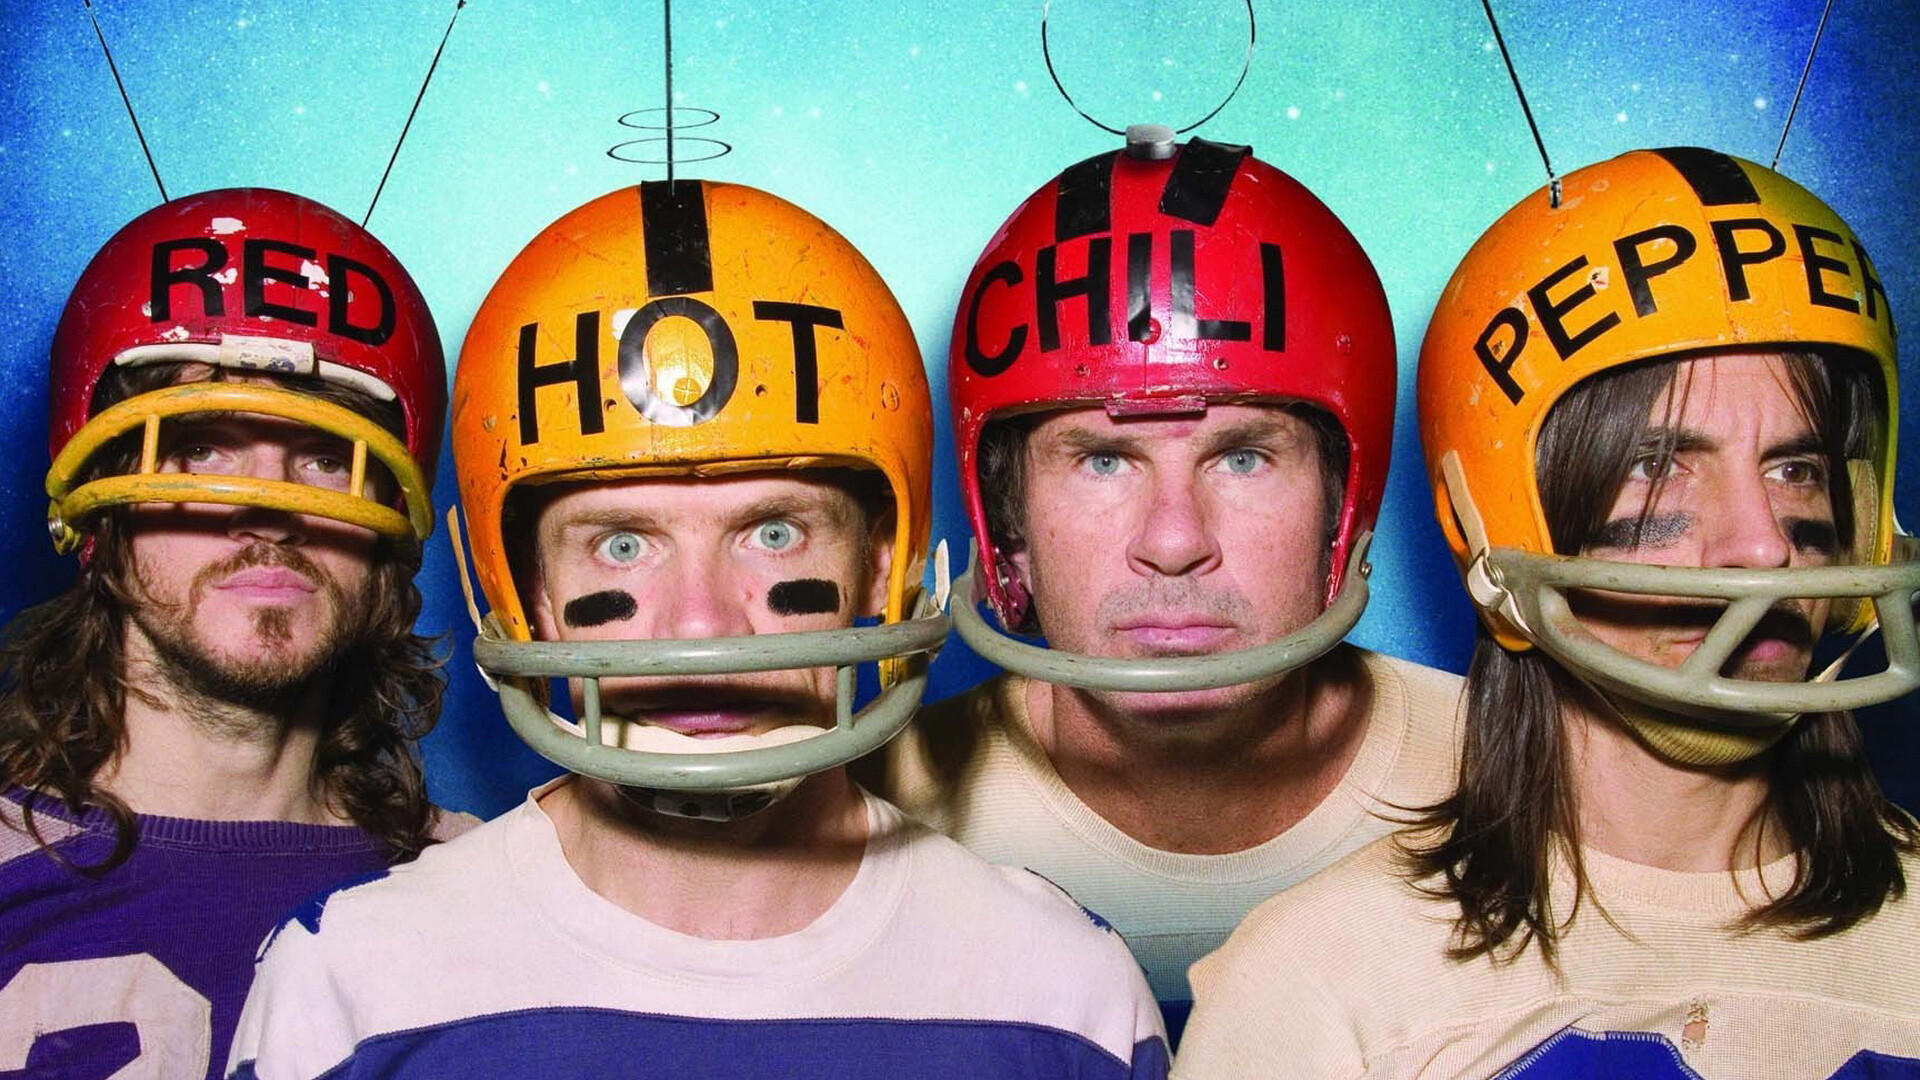 Red Hot Chilli Peppers: An American rock band that combined funk and punk rock to create a new musical style in the 1980s. 1920x1080 Full HD Wallpaper.